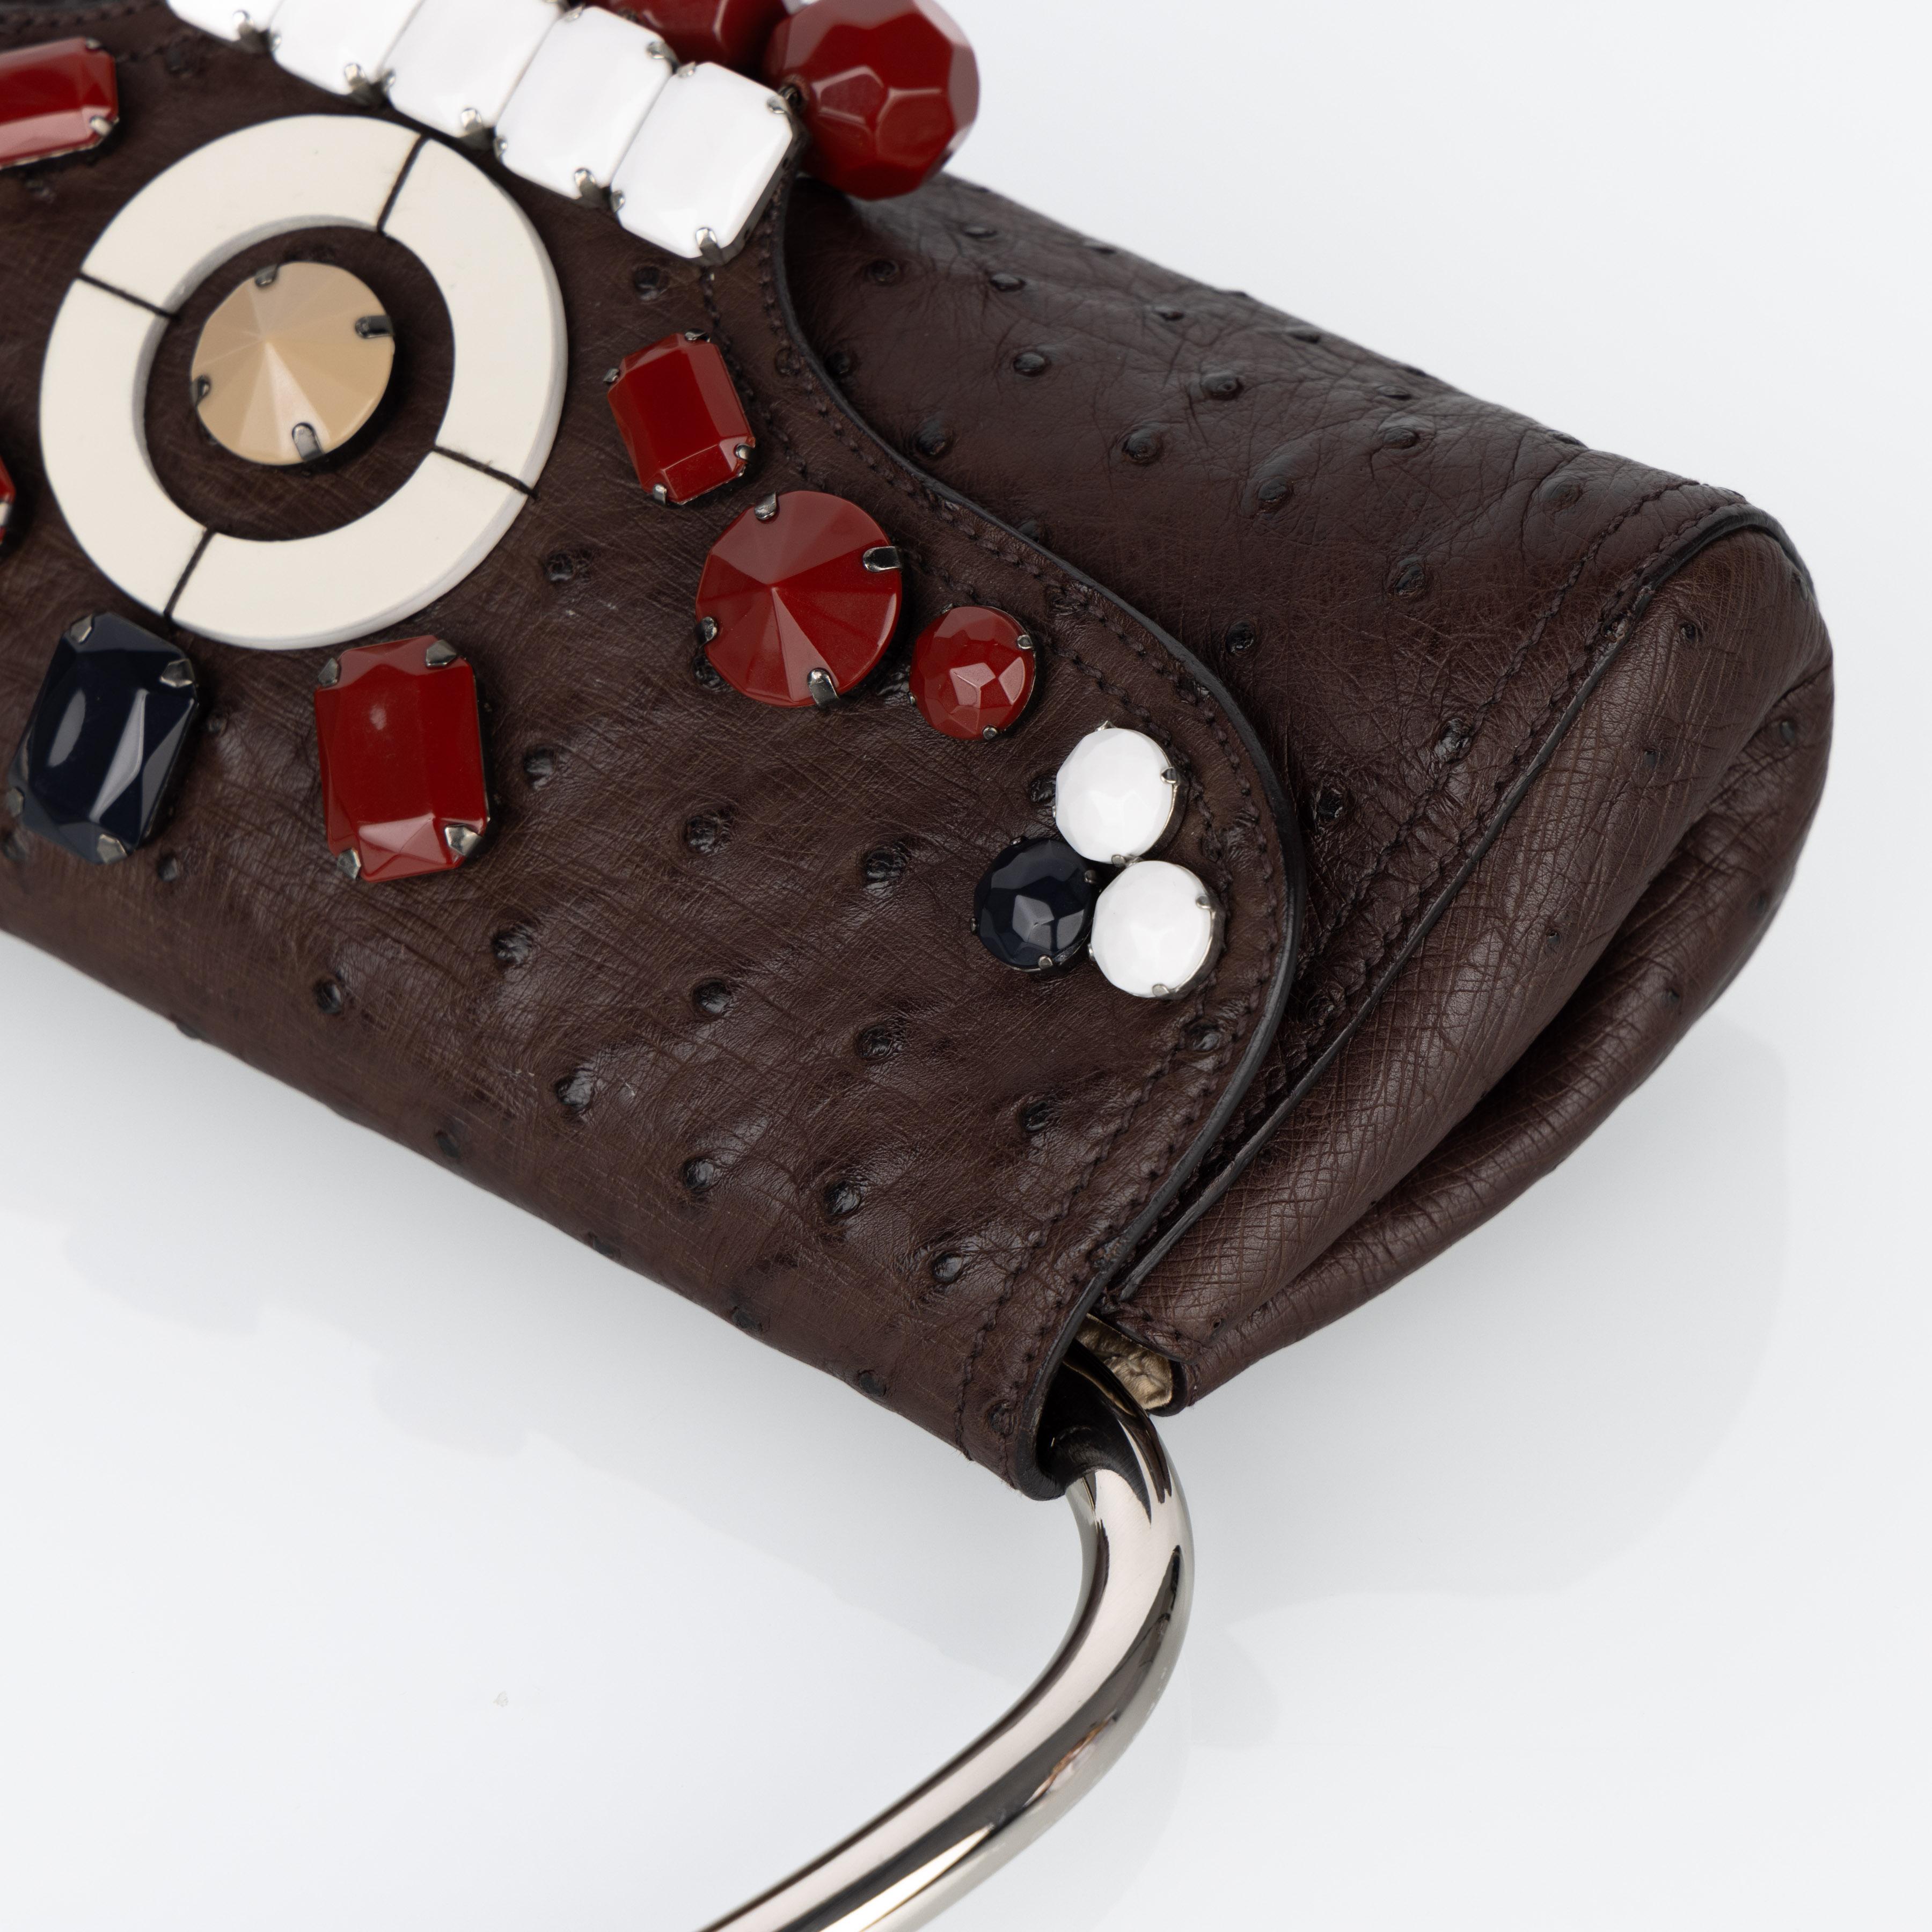 Prada Brown Ostrich Leather Jewel Embellished Swing Bag SS 2003 Archival Piece For Sale 7